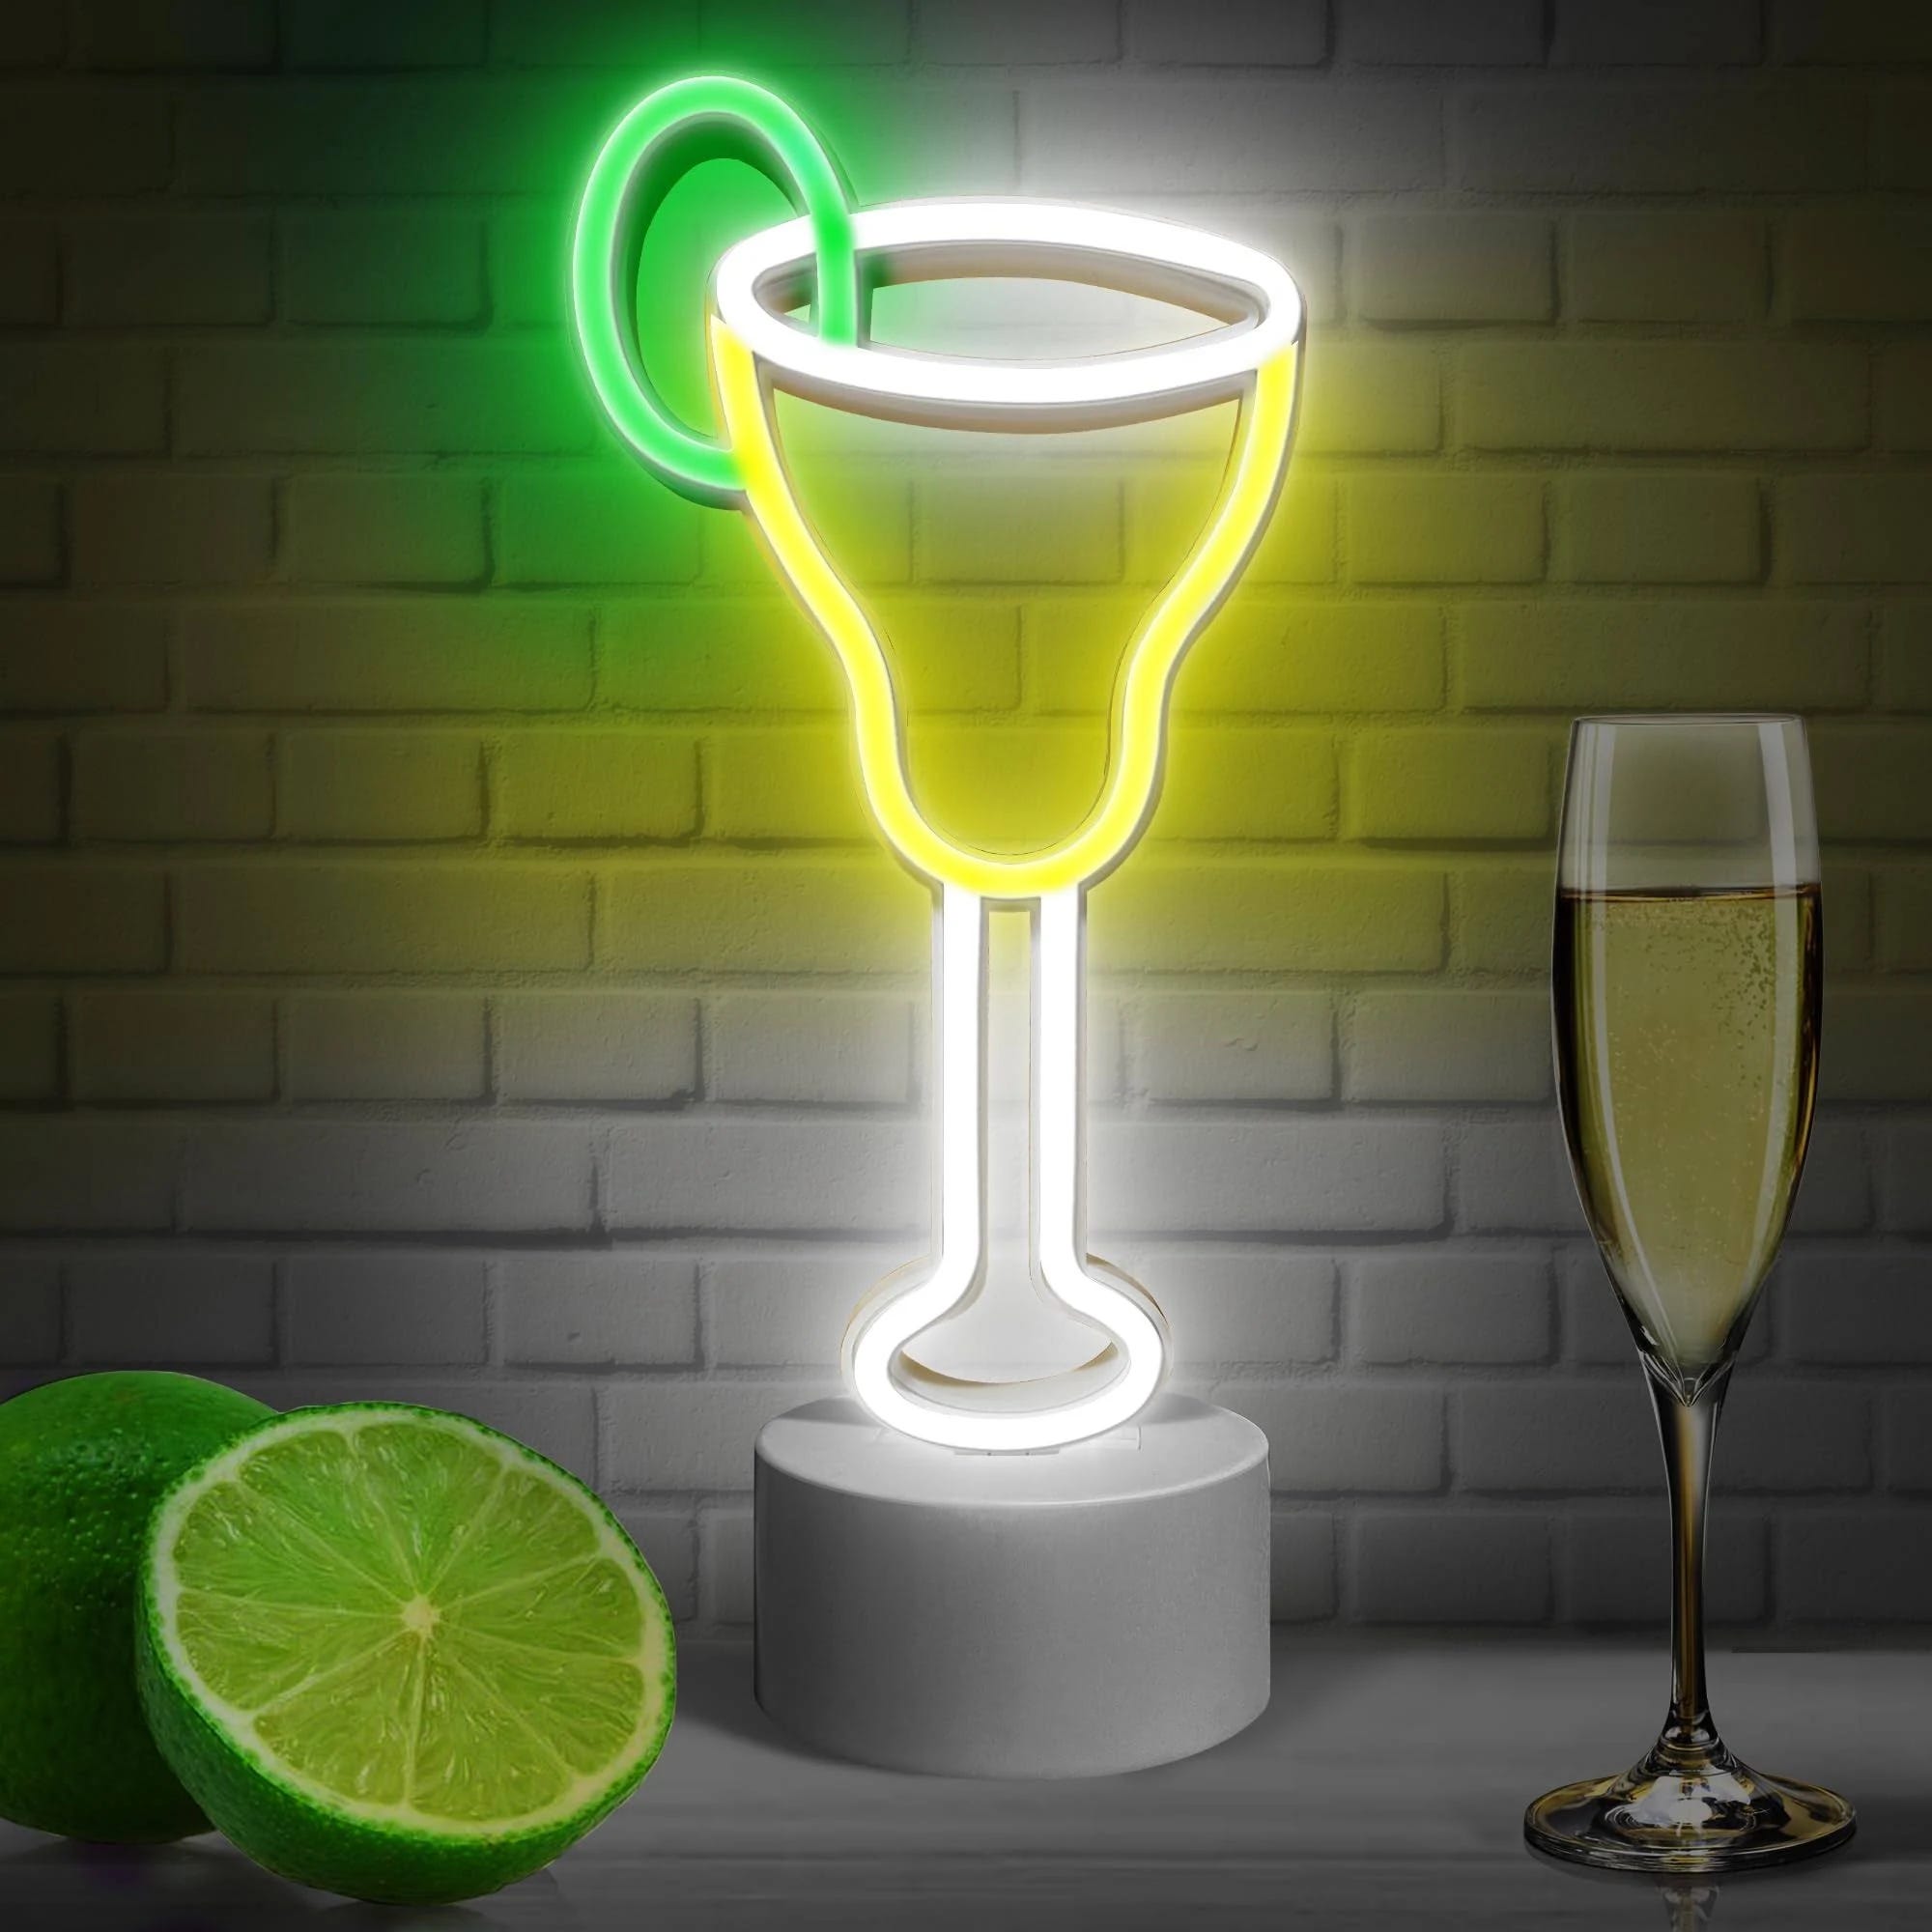 Lumoonosity Cocktail Neon Sign: Vibrant Bar Decor and Mood Booster | Image